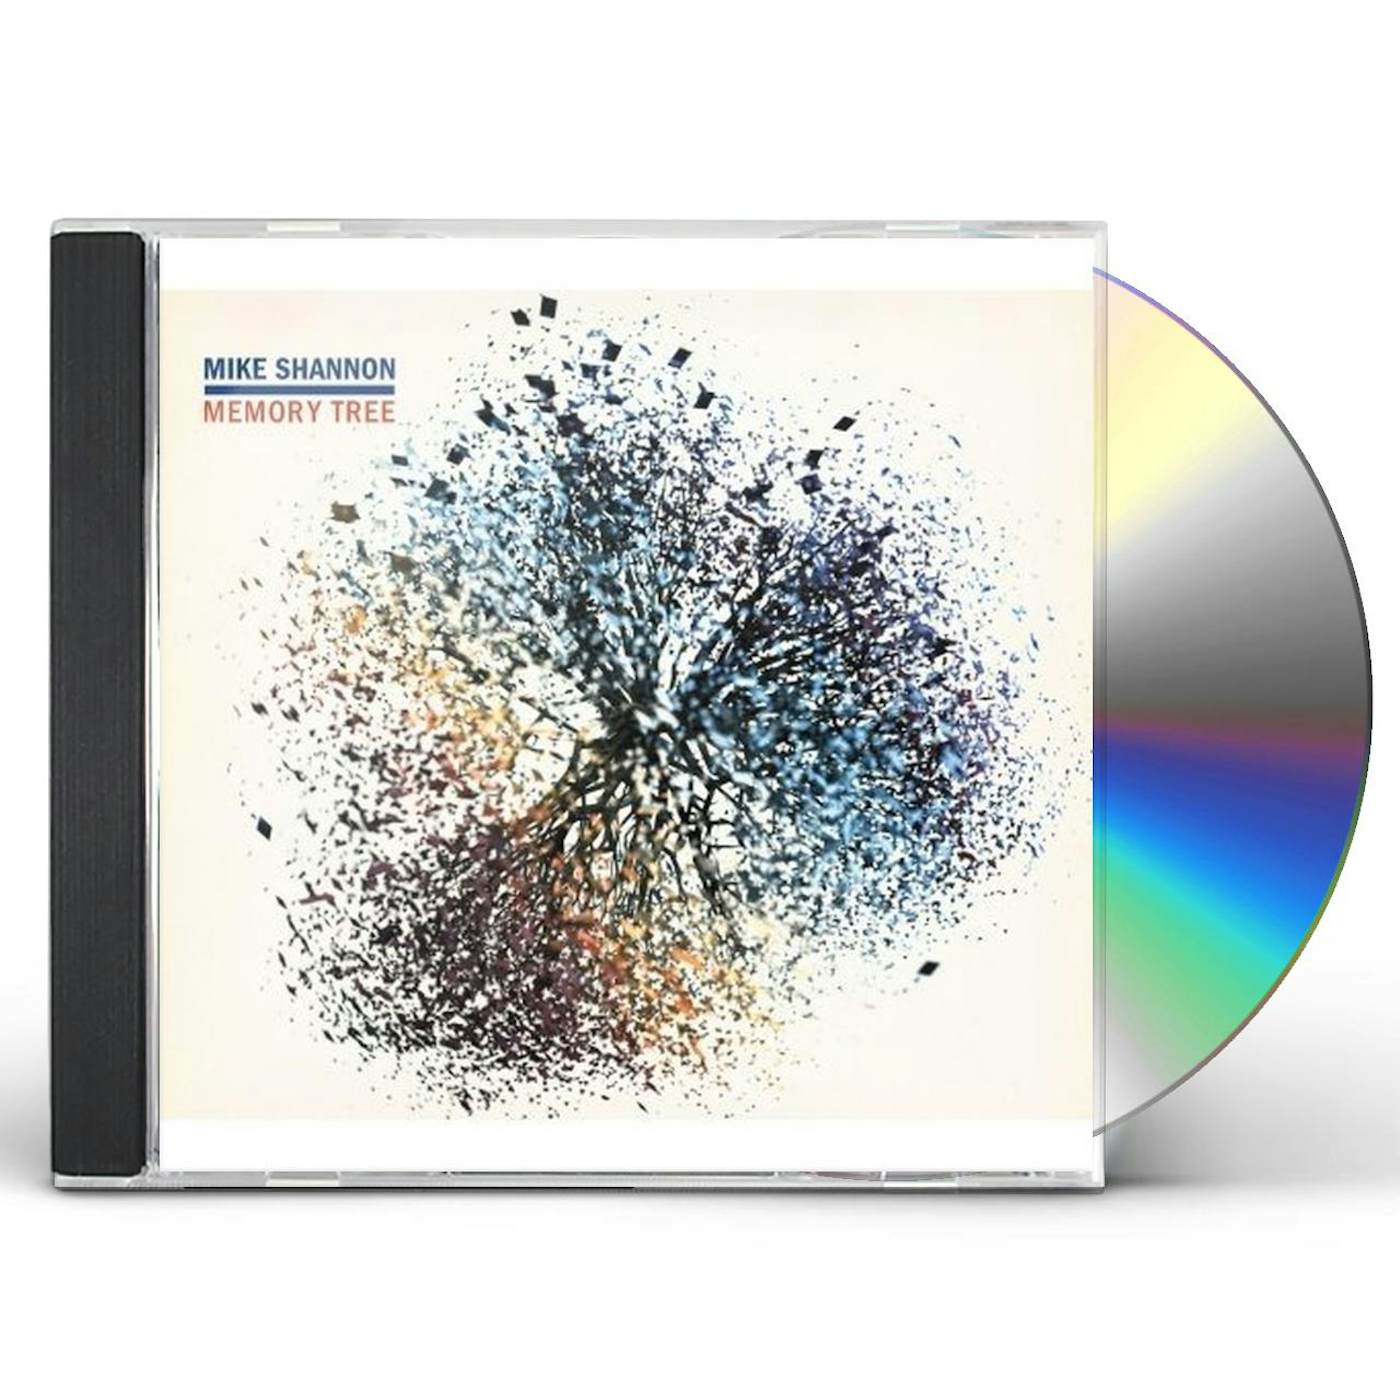 Mike Shannon MEMORY TREE CD